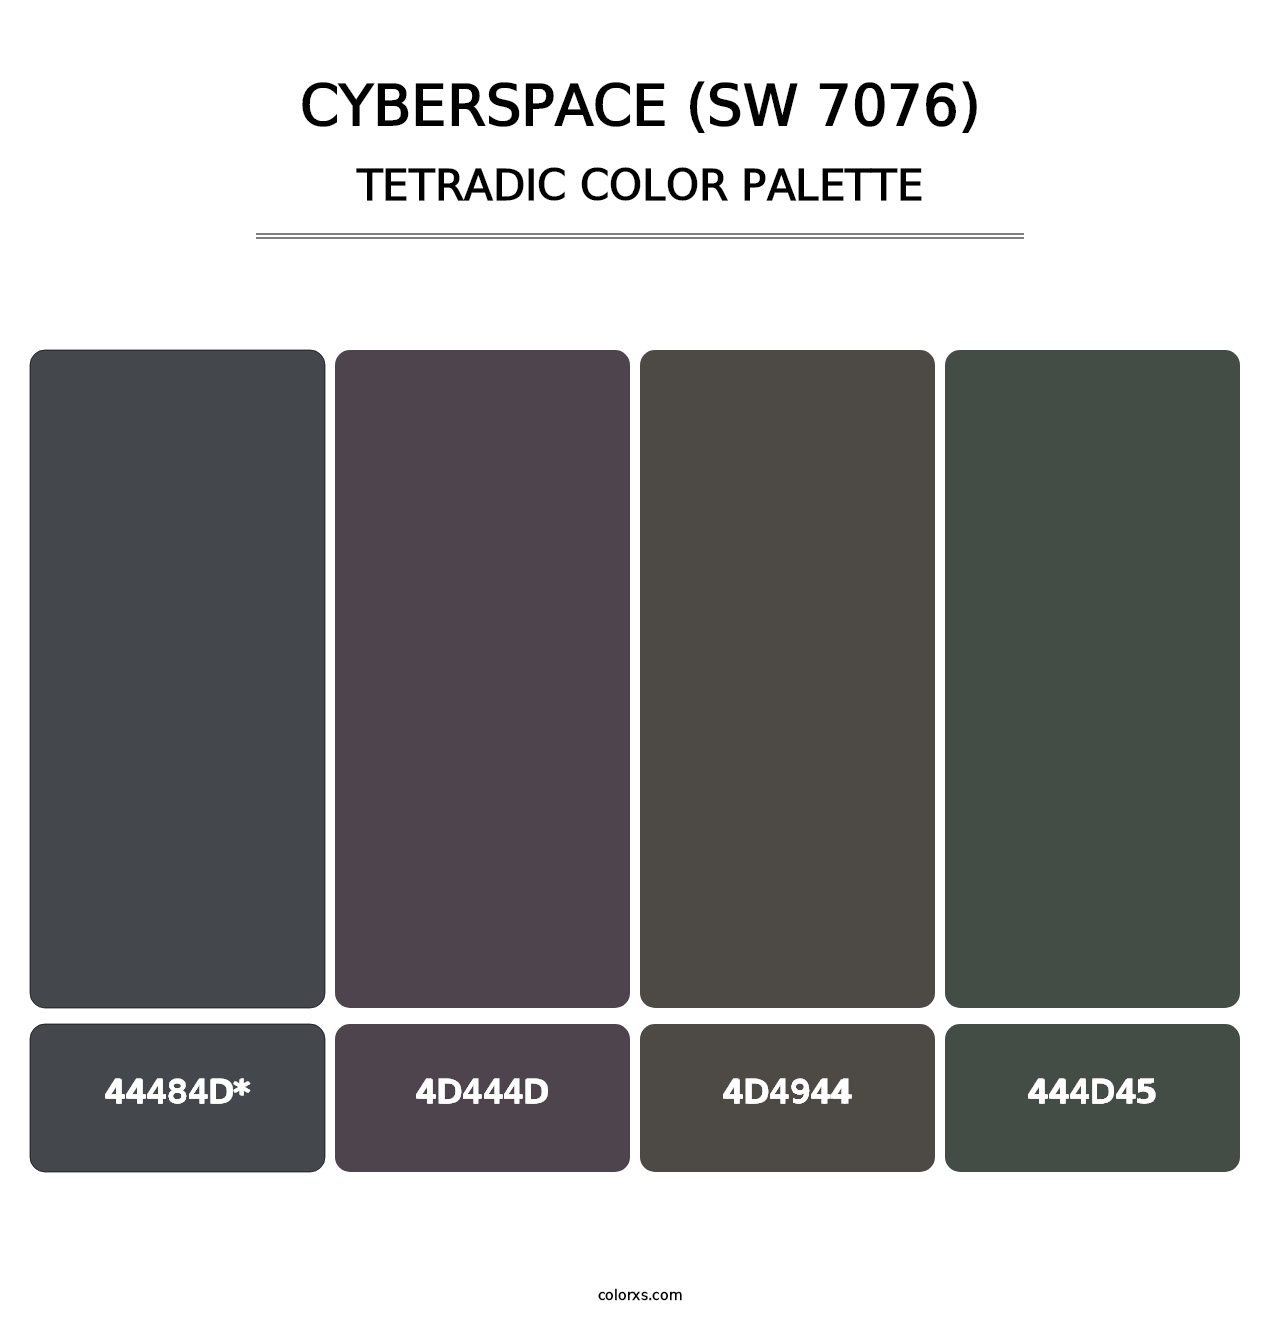 Cyberspace (SW 7076) - Tetradic Color Palette